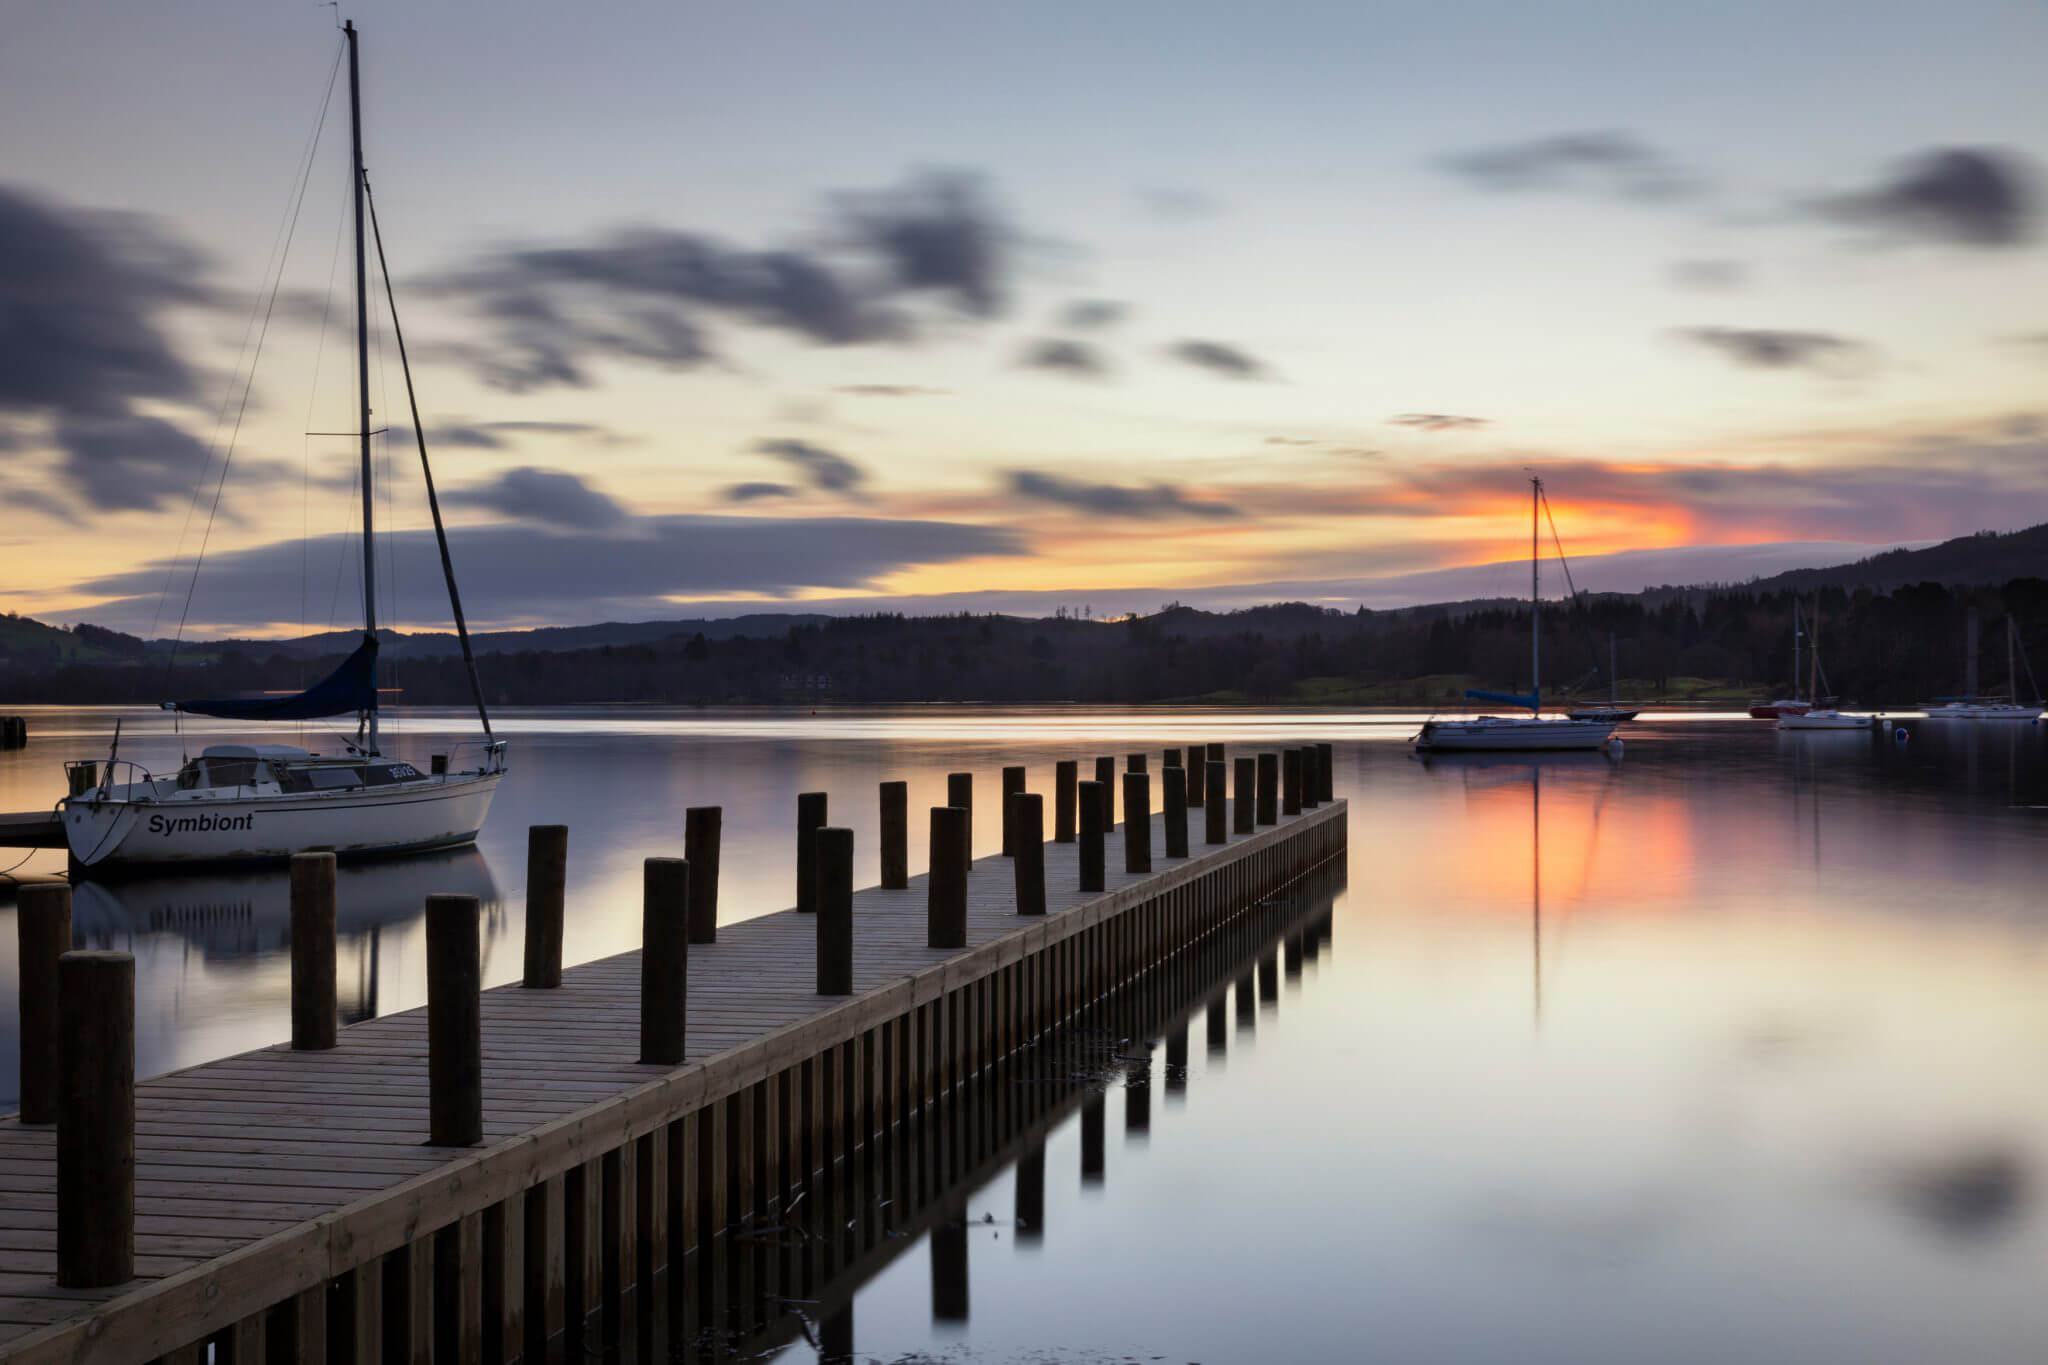 In October, Cumbria Tourism launched its #AttractionsActivitiesMonth, and while October may have been and gone, we thought we would share some of our favourite attractions and activities near Windermere.